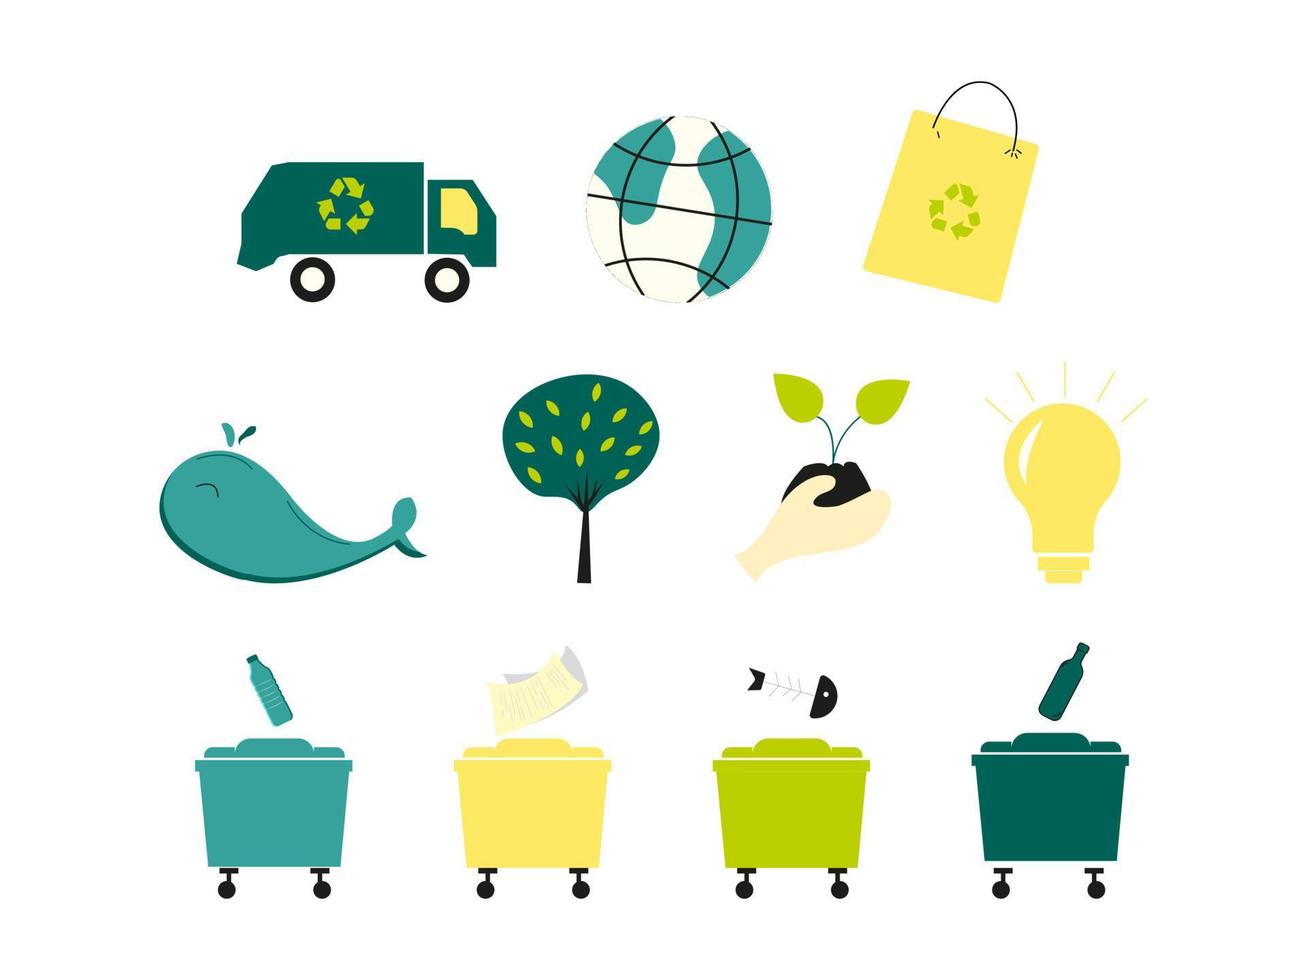 Recycling elements collection included garbage truck, paper bag, tree, plant, bulb, trash cans, whale as ocean dweller. vector